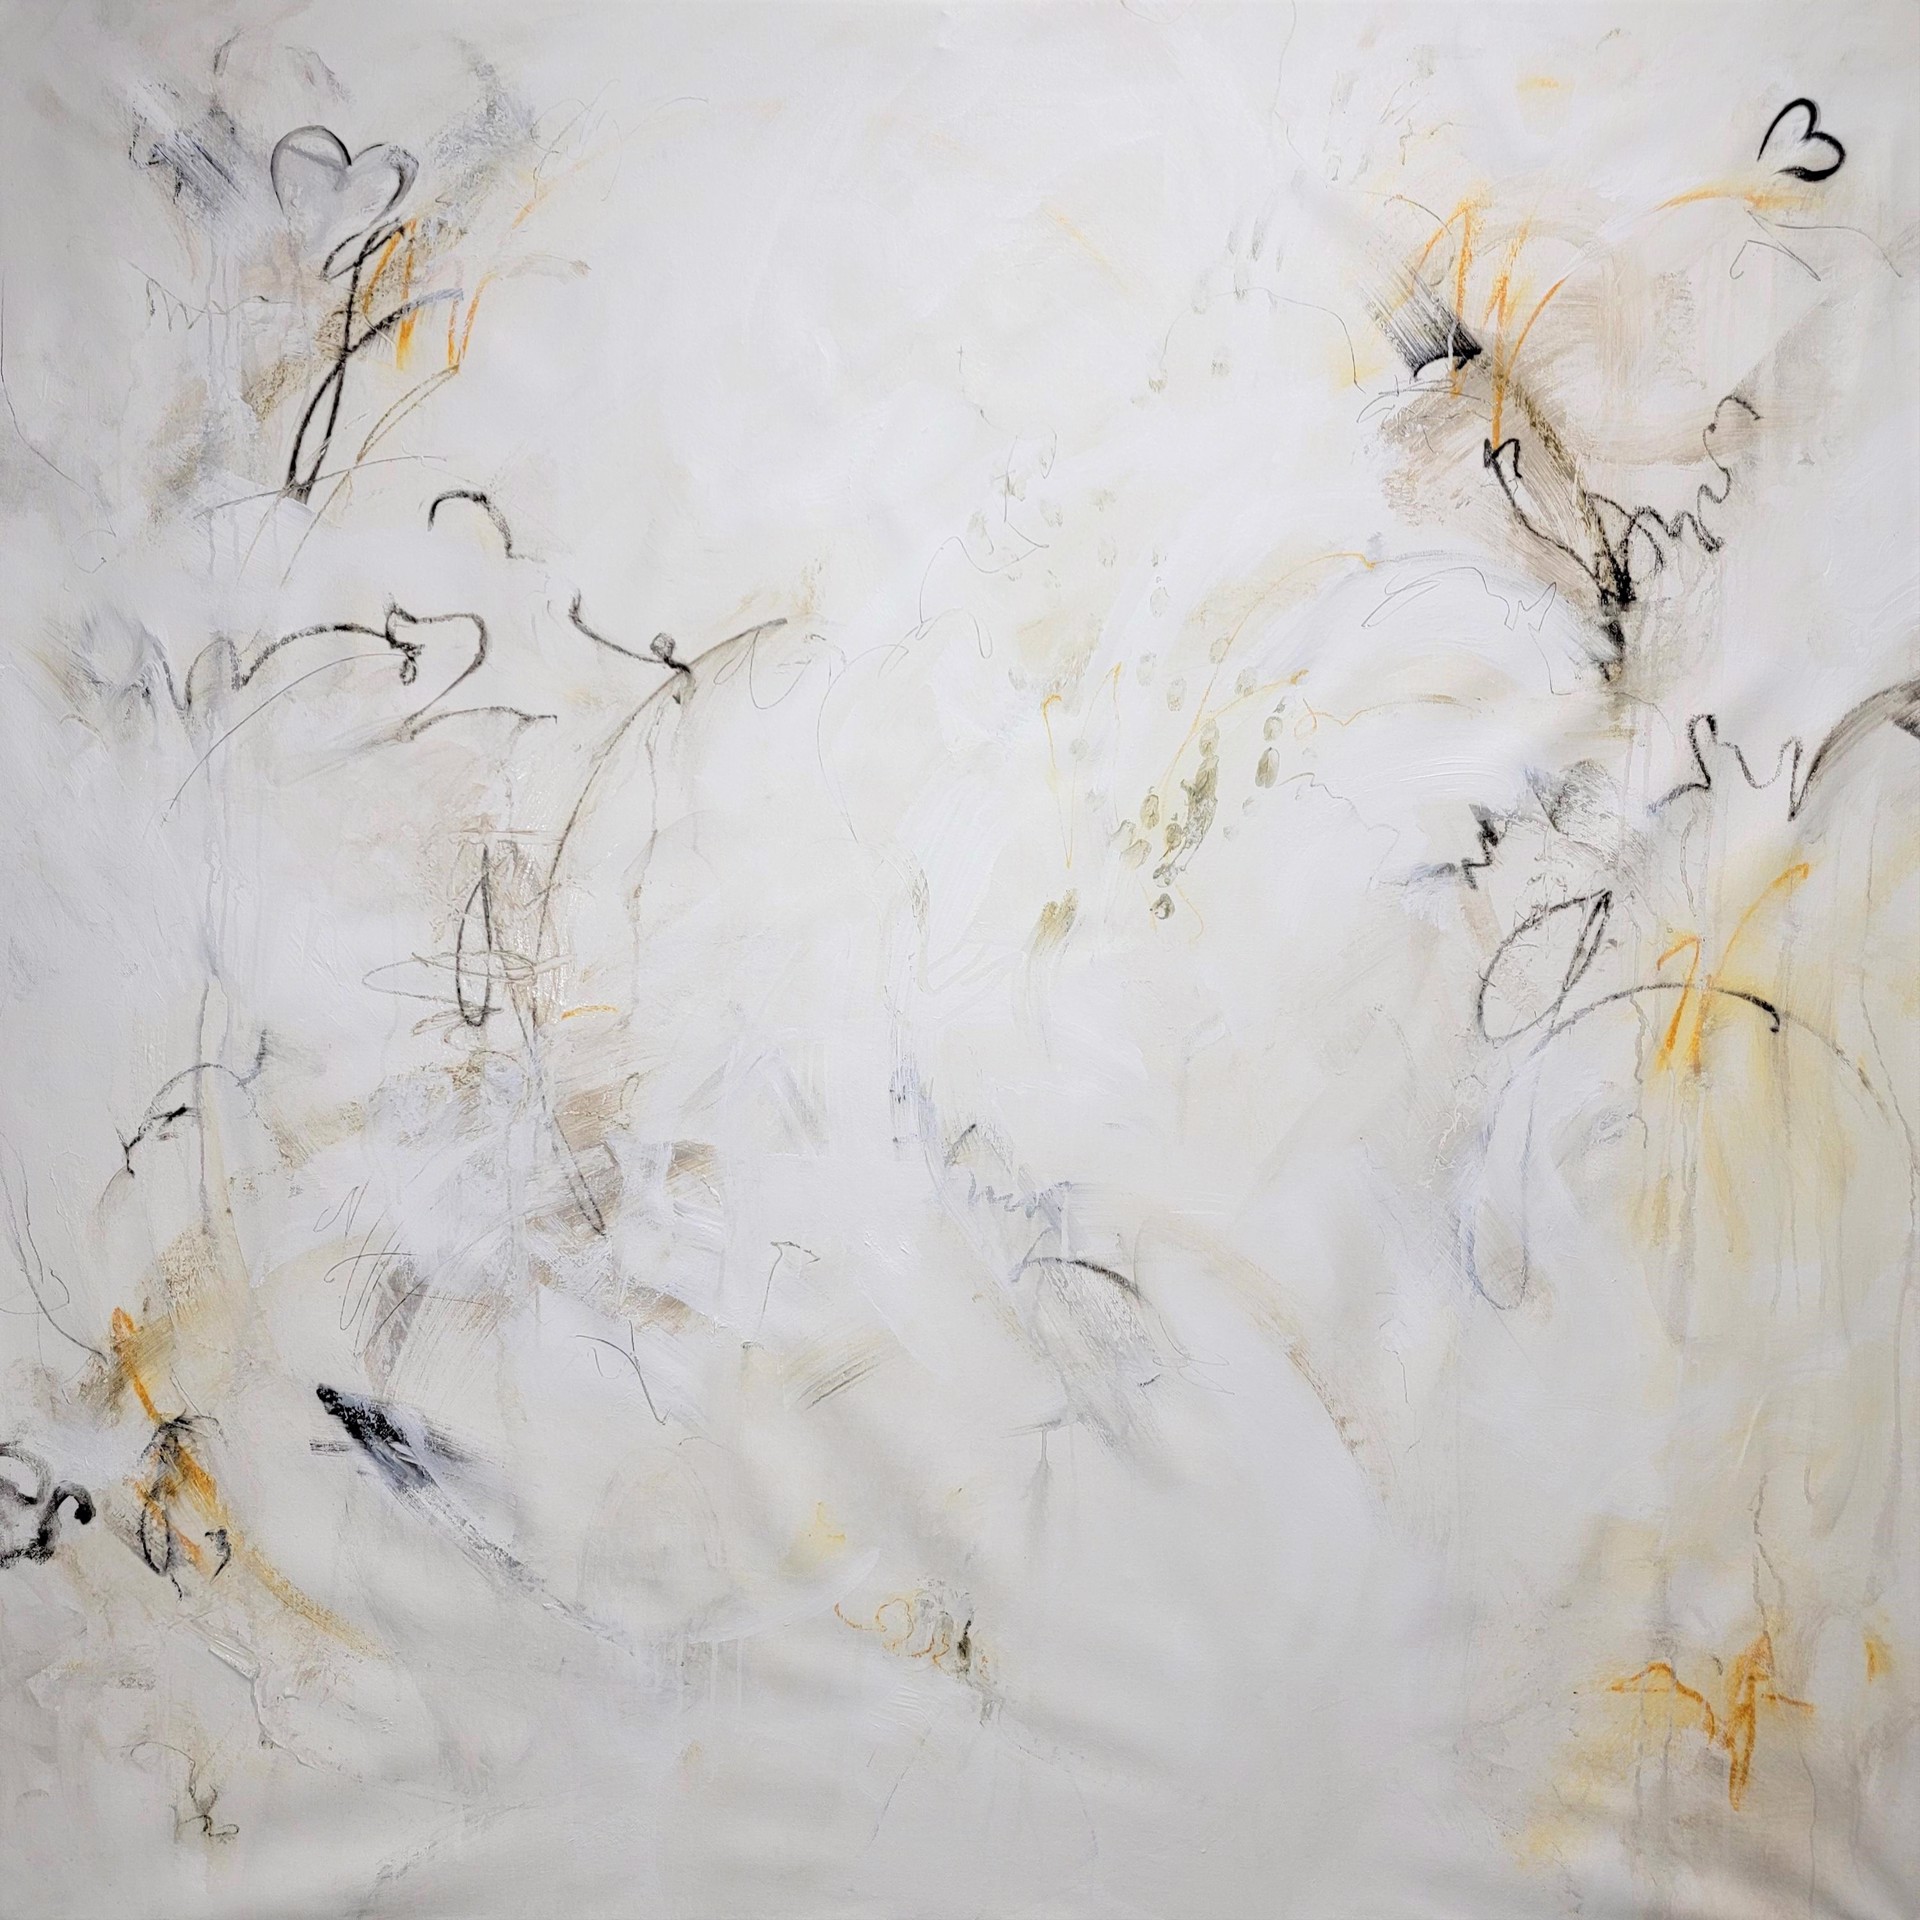 Lyrical Abstraction by Elizabeth Chapman